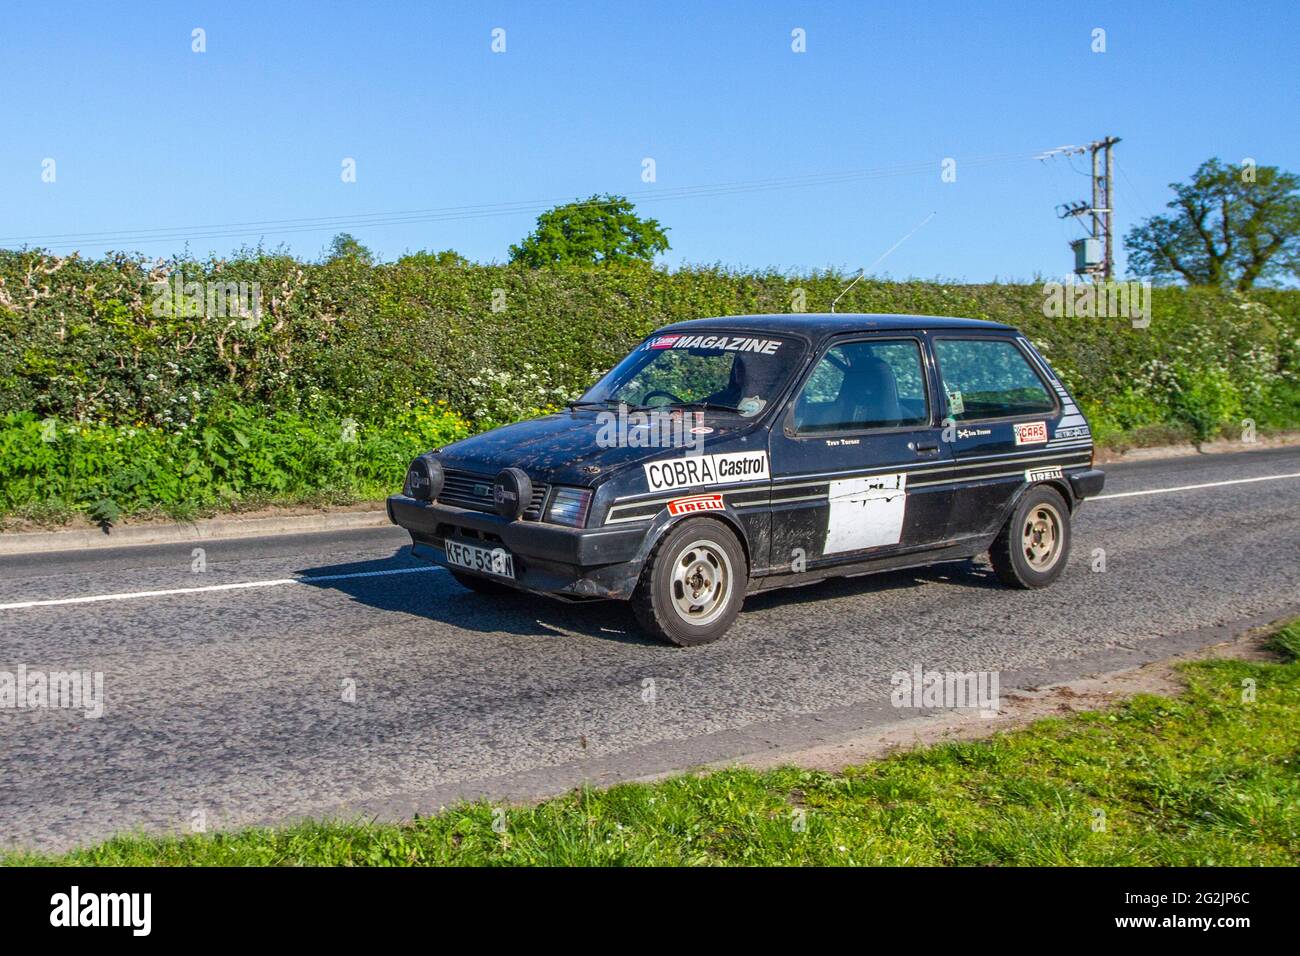 Cobra Castrol, 1980 80s Austin Metro Hls black 1275cc petrol hatchback, en-route to Capesthorne Hall classic May car show, Cheshire, UK Stock Photo